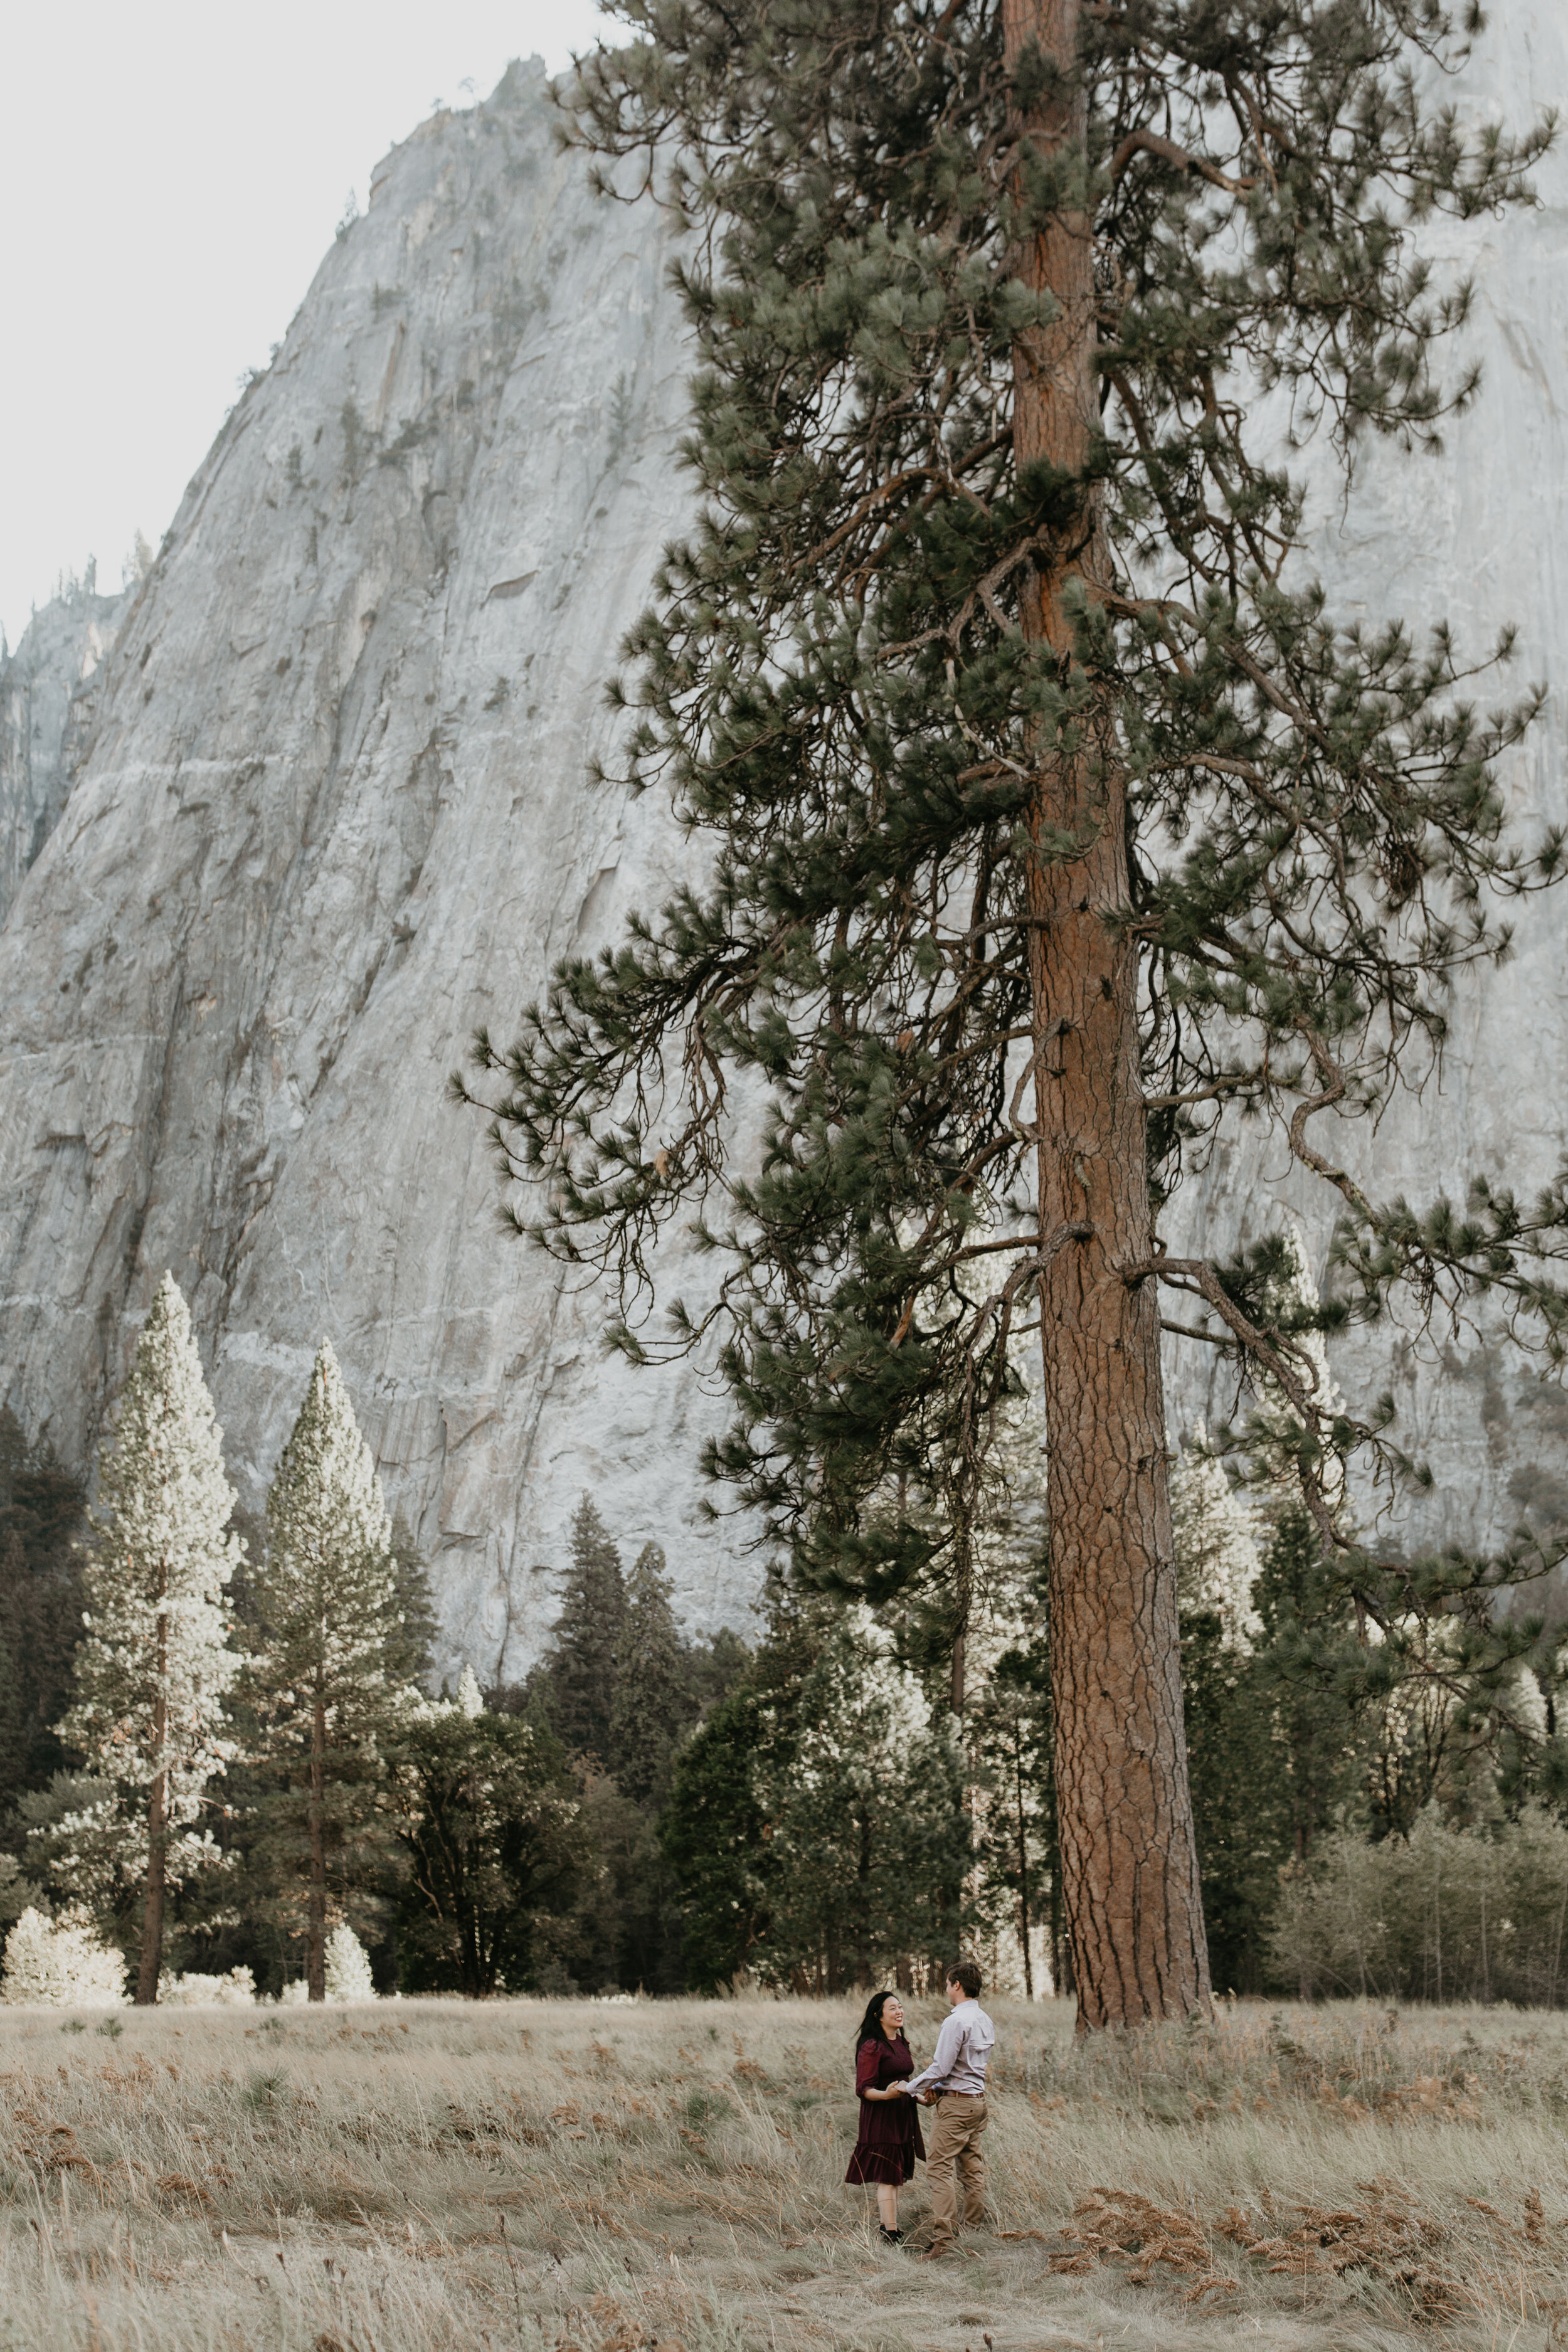 yosemite-national-park-couples-session-at-taft-point-and-yosemite-valley-yosemite-elopement-photographer-nicole-daacke-photography-100.jpg